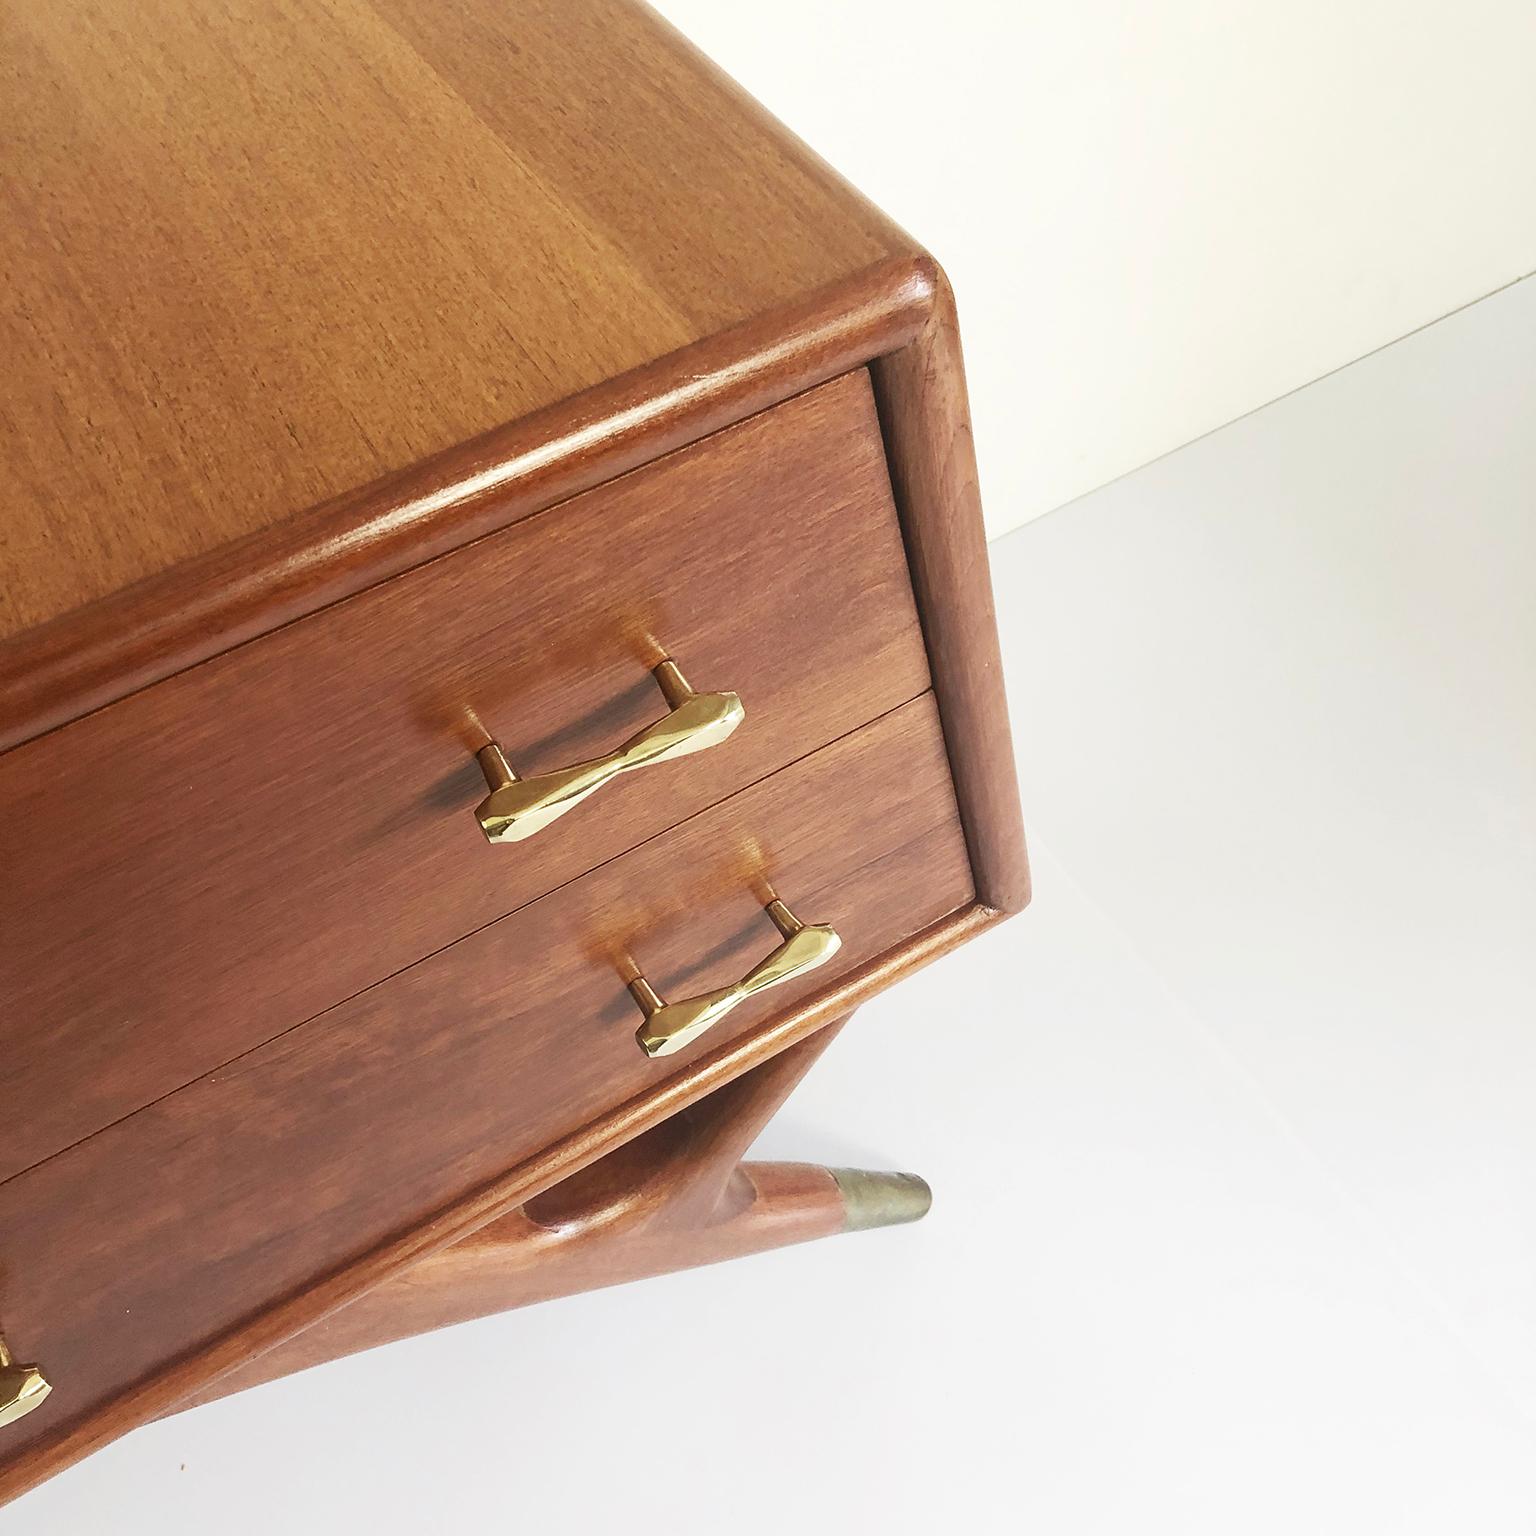 We offer this pair of mahogany and brass nightstands. Made in Mexico circa 1950s by Eugenio Escudero. Nightstands supported by sculptural leg in solid mahogany wood.